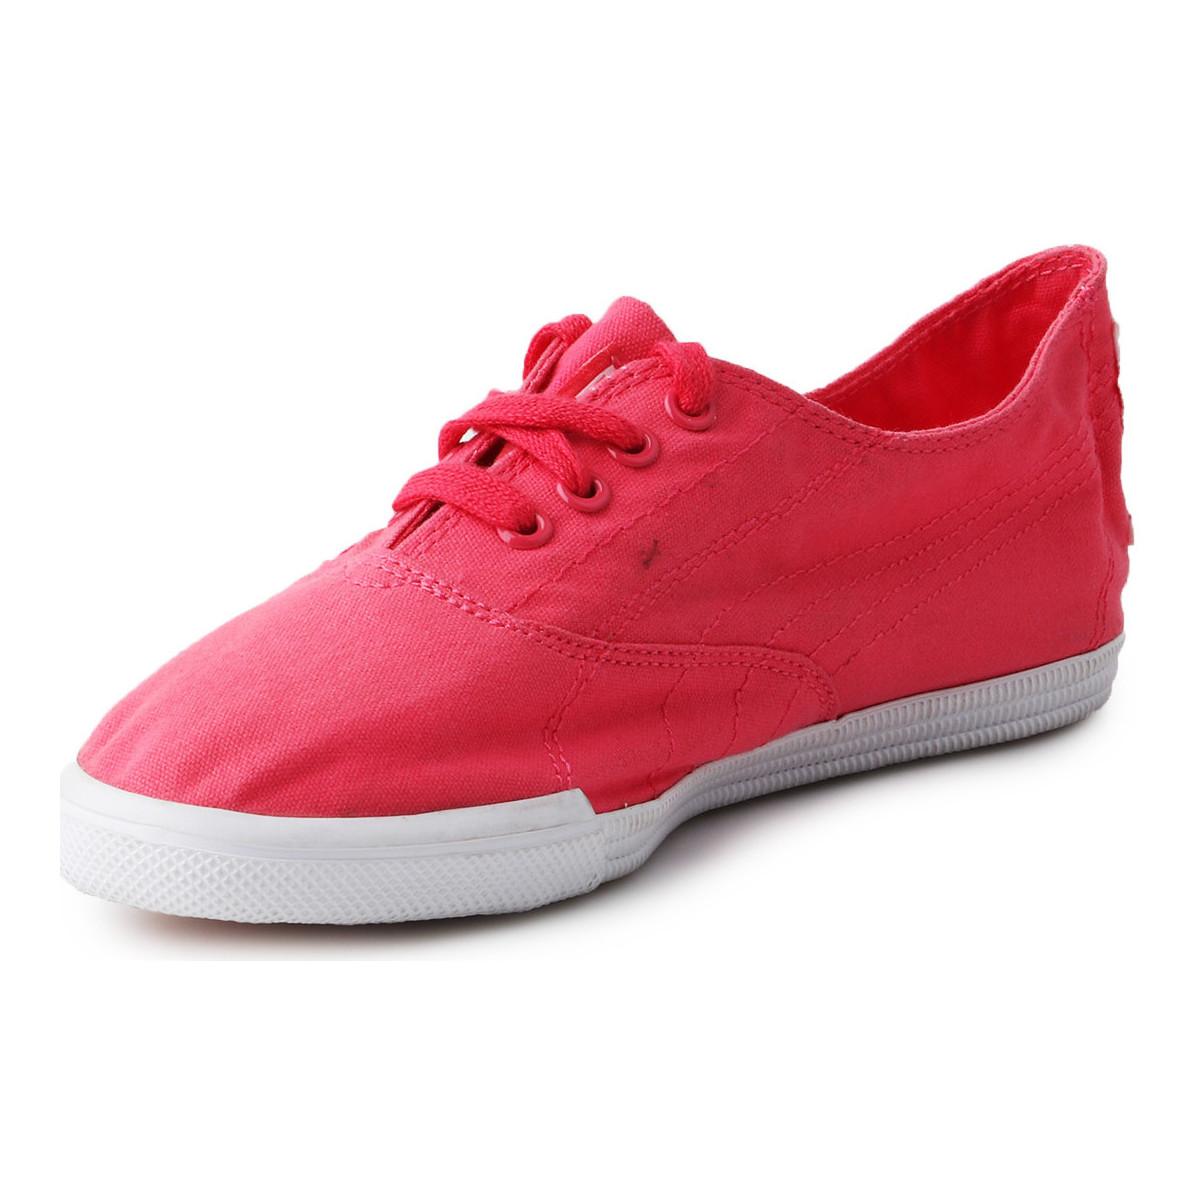 PUMA Tekkies Rogue Red 352111-05 Tennis Trainers (shoes) - Lyst